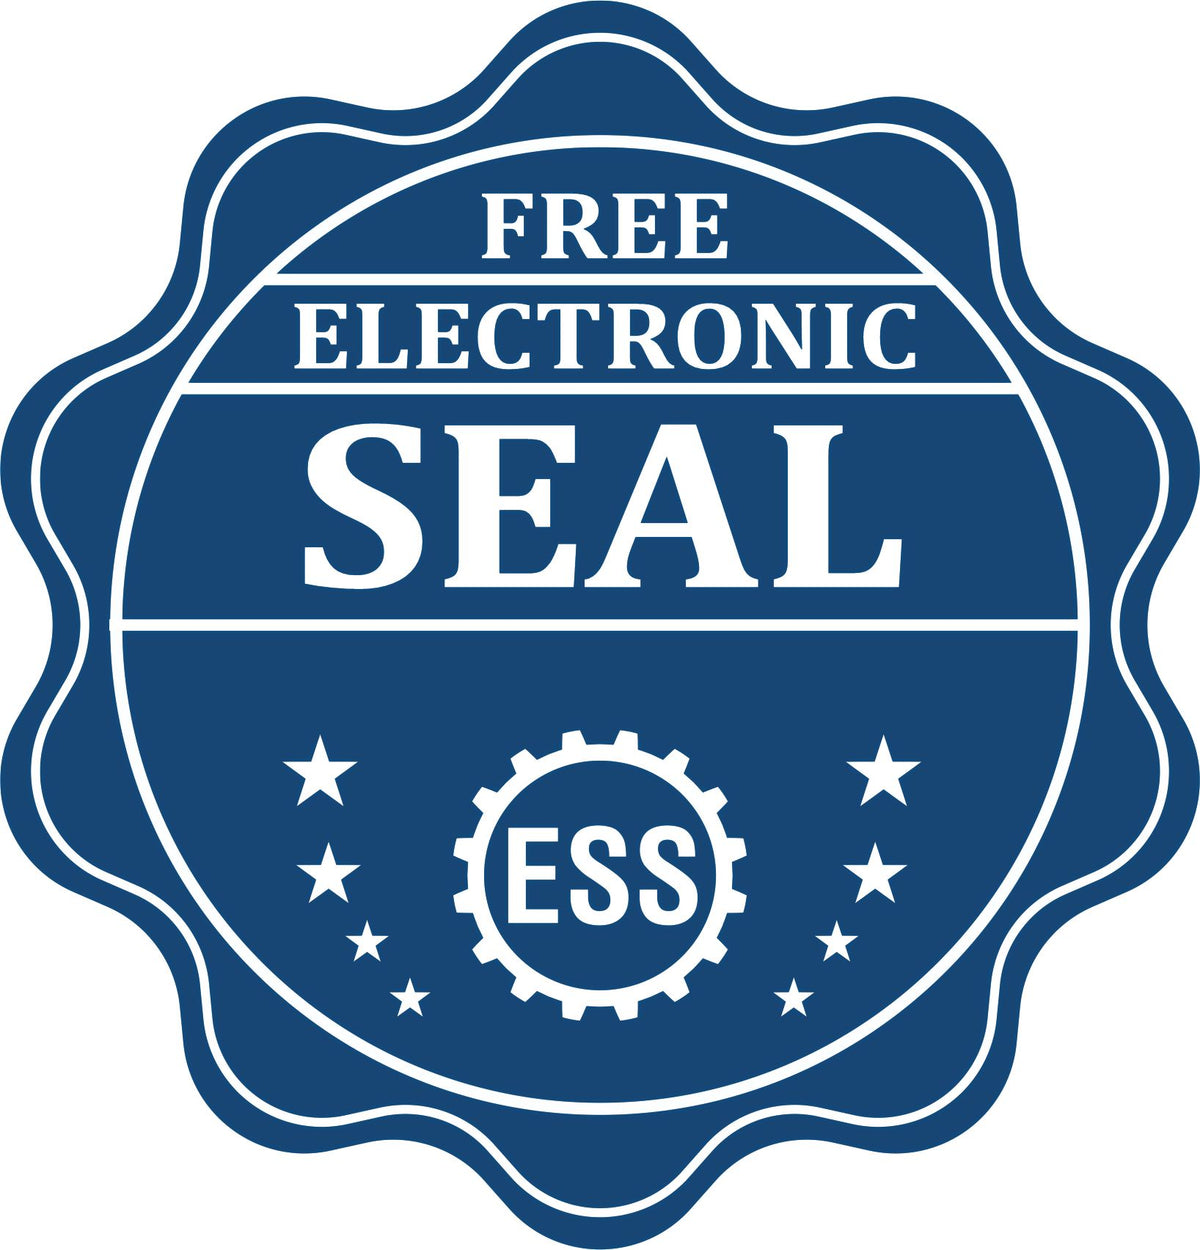 A badge showing a free electronic seal for the Gift Iowa Engineer Seal with stars and the ESS gear on the emblem.